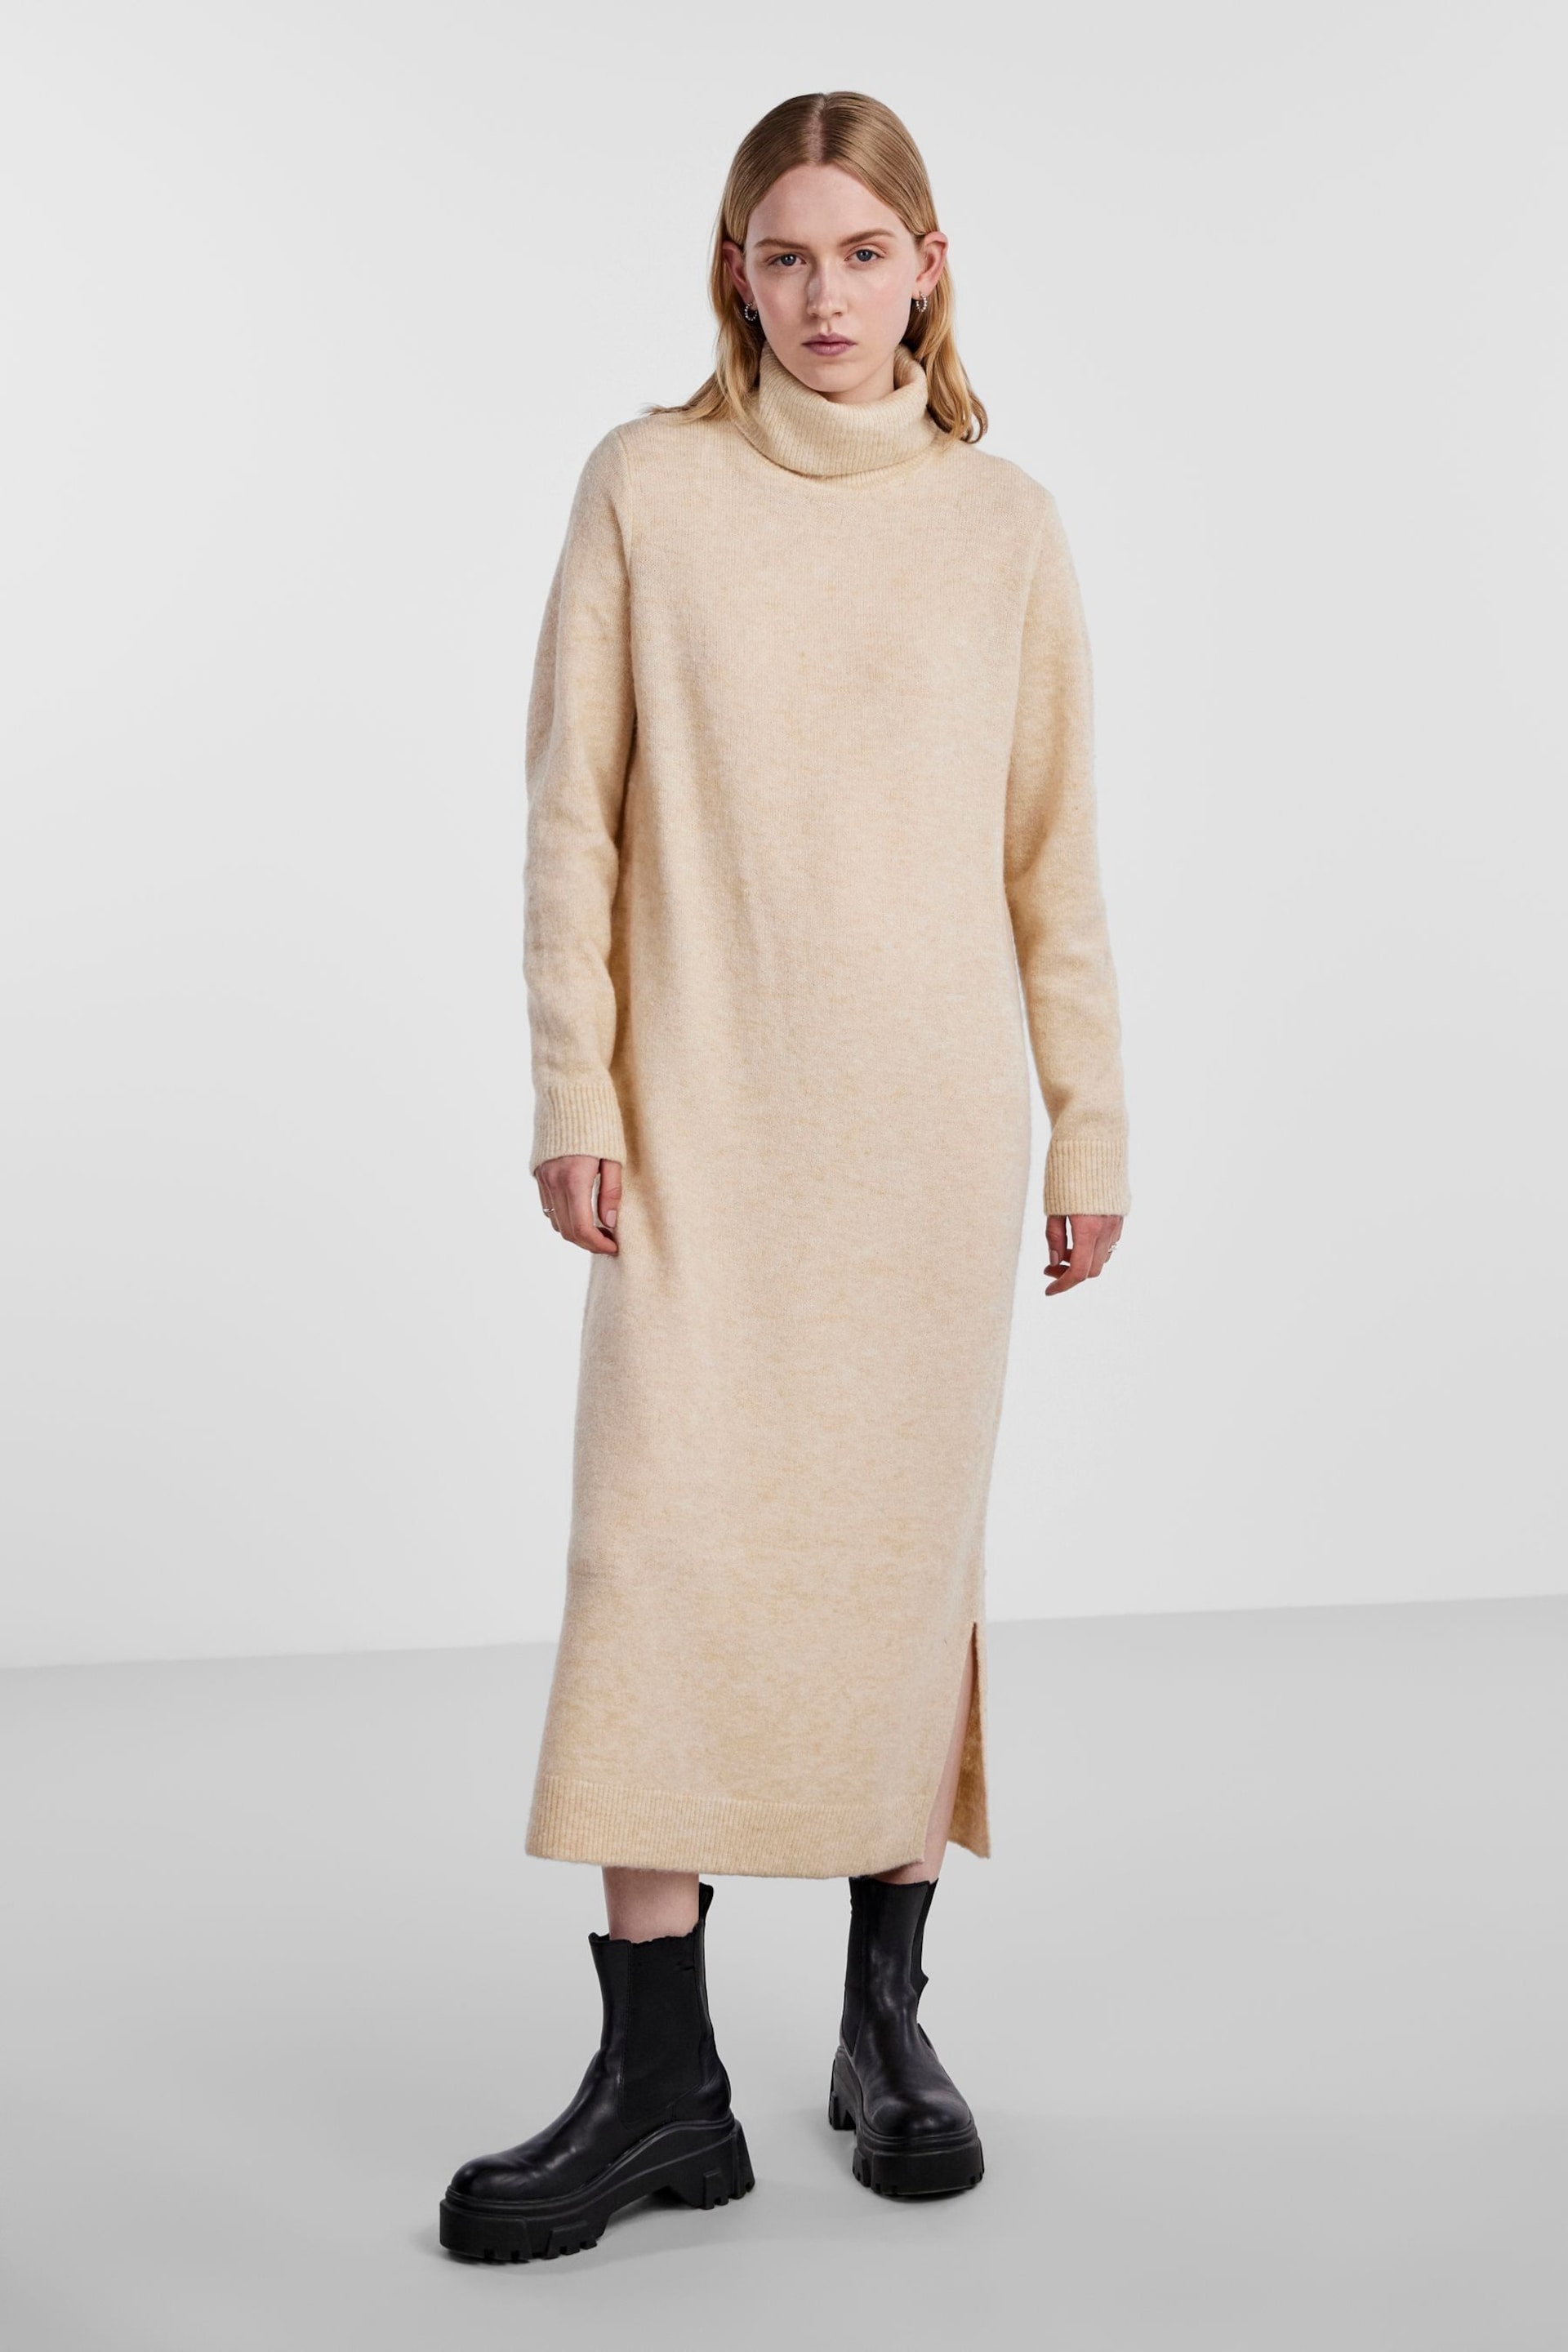 PIECES Cream Roll Neck Knitted Midi Jumper Dress - Image 1 of 5